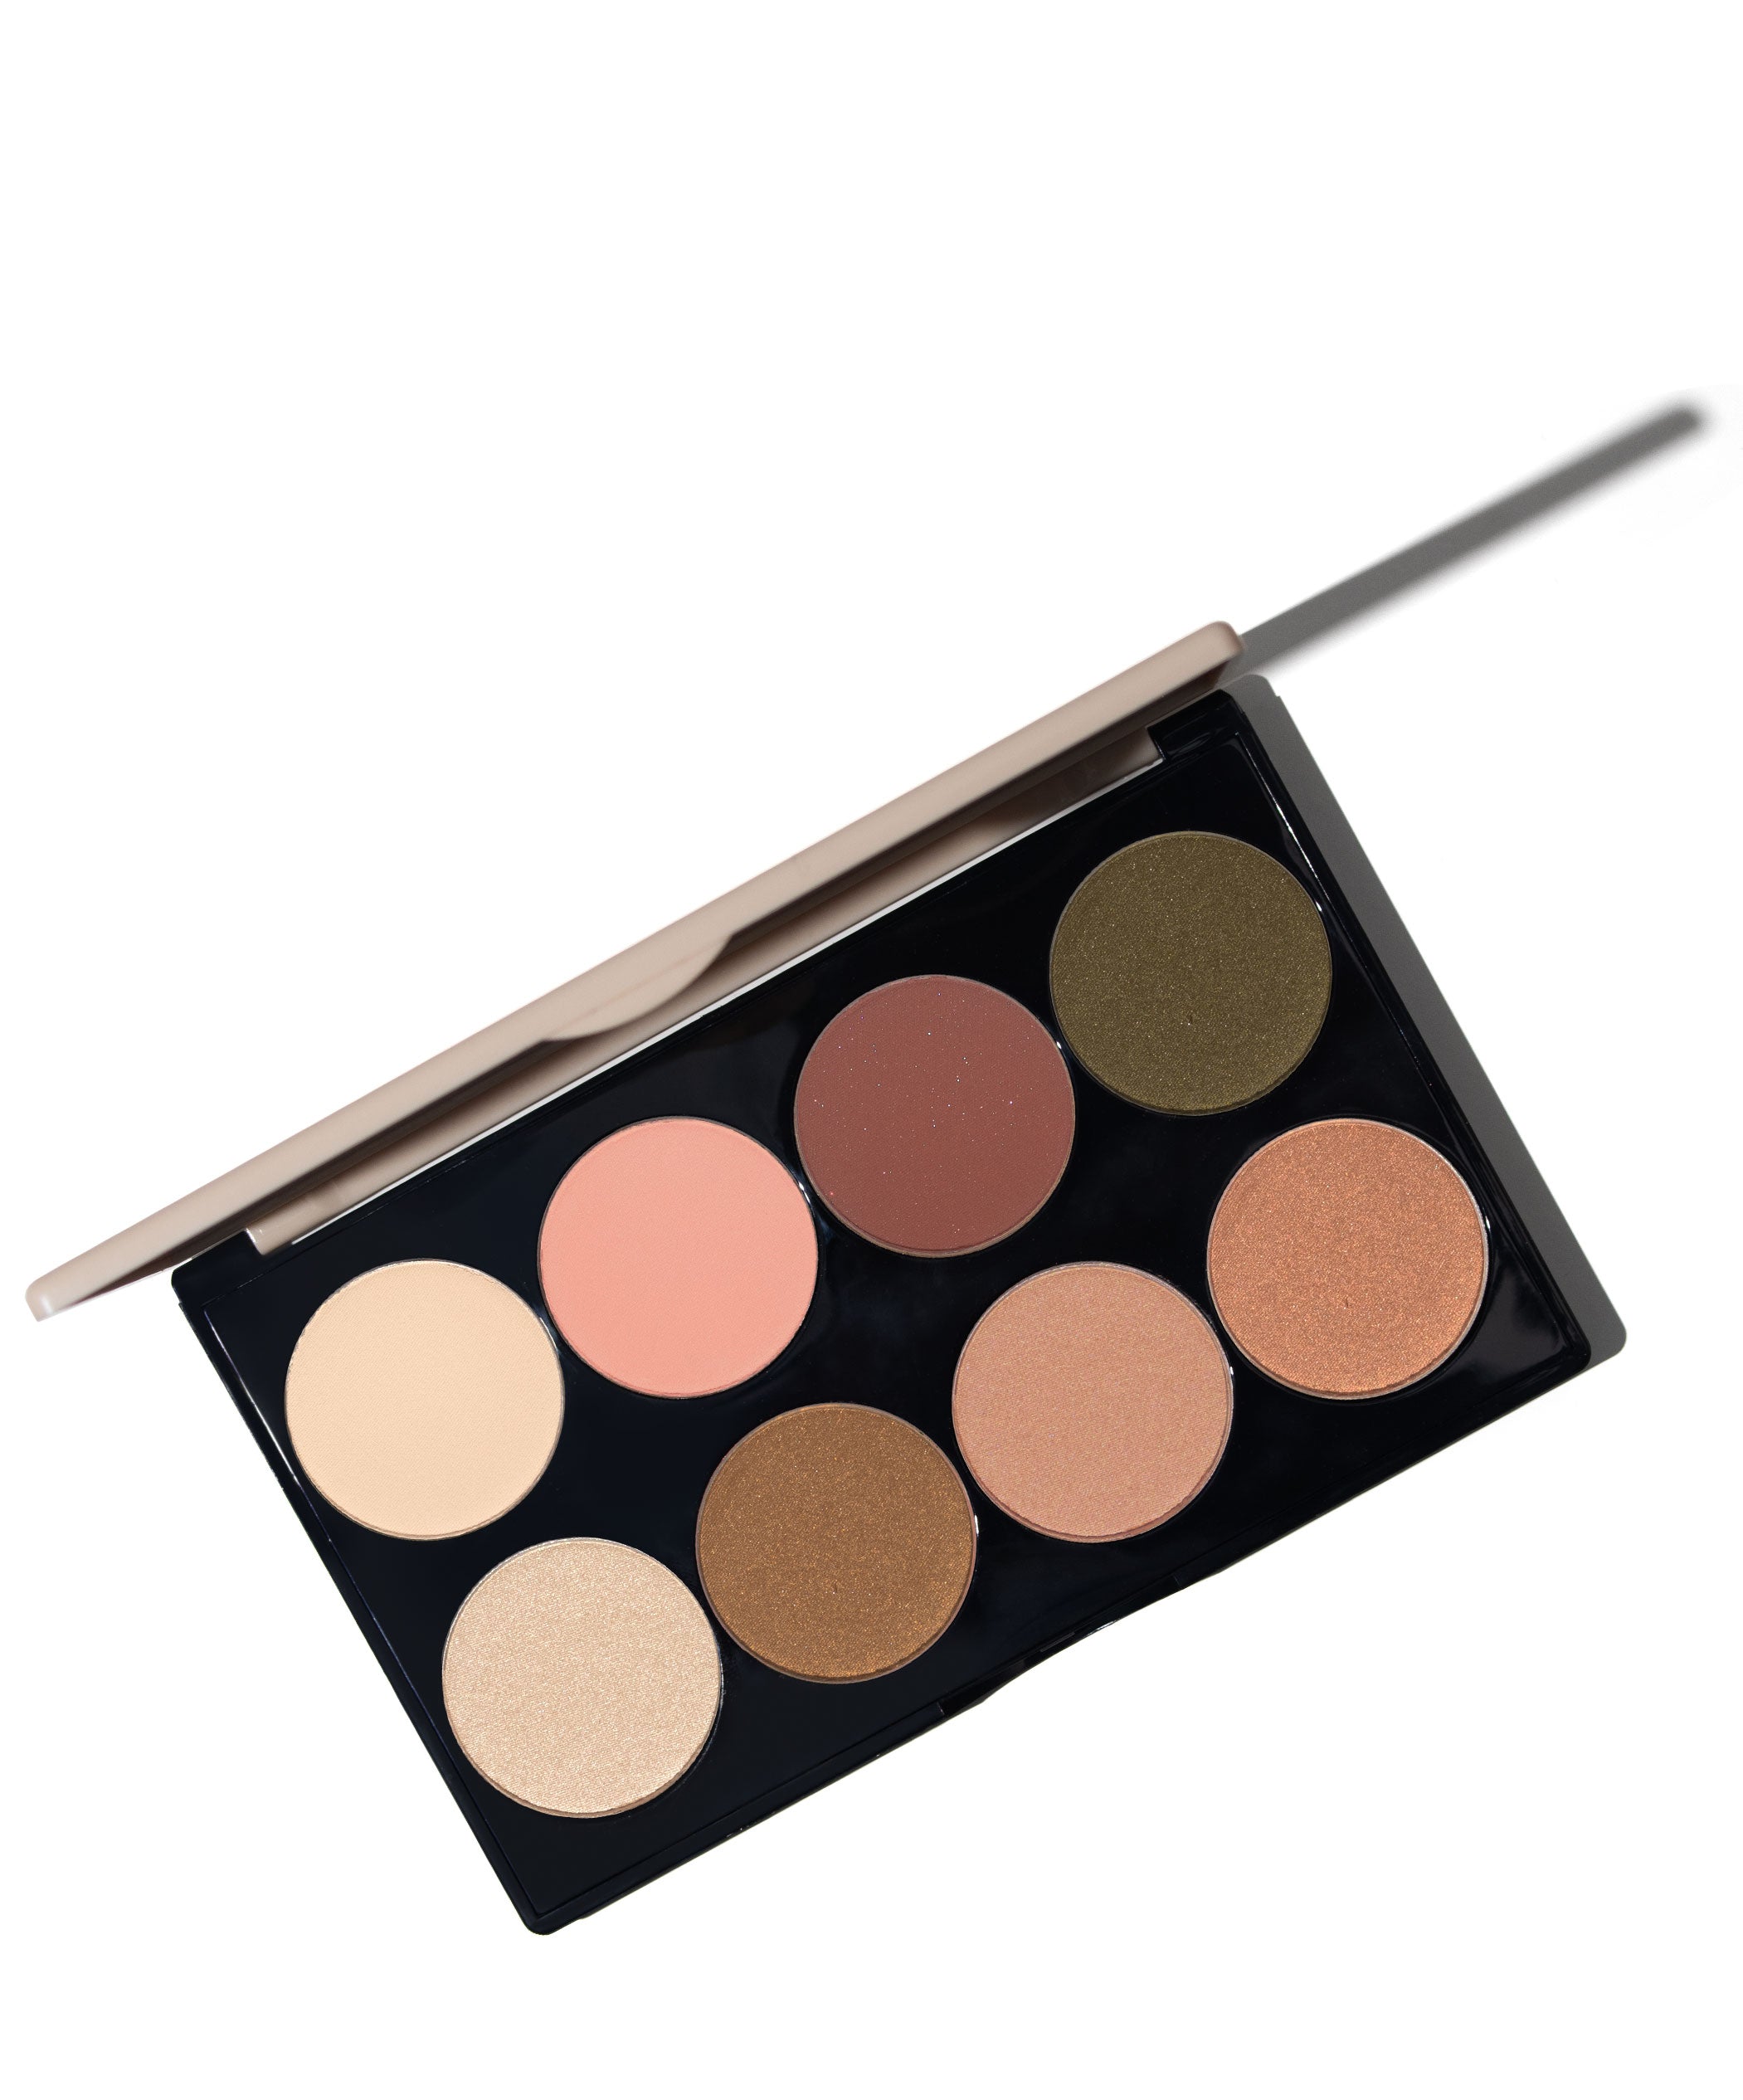 Limited Edition: Signature Palettes